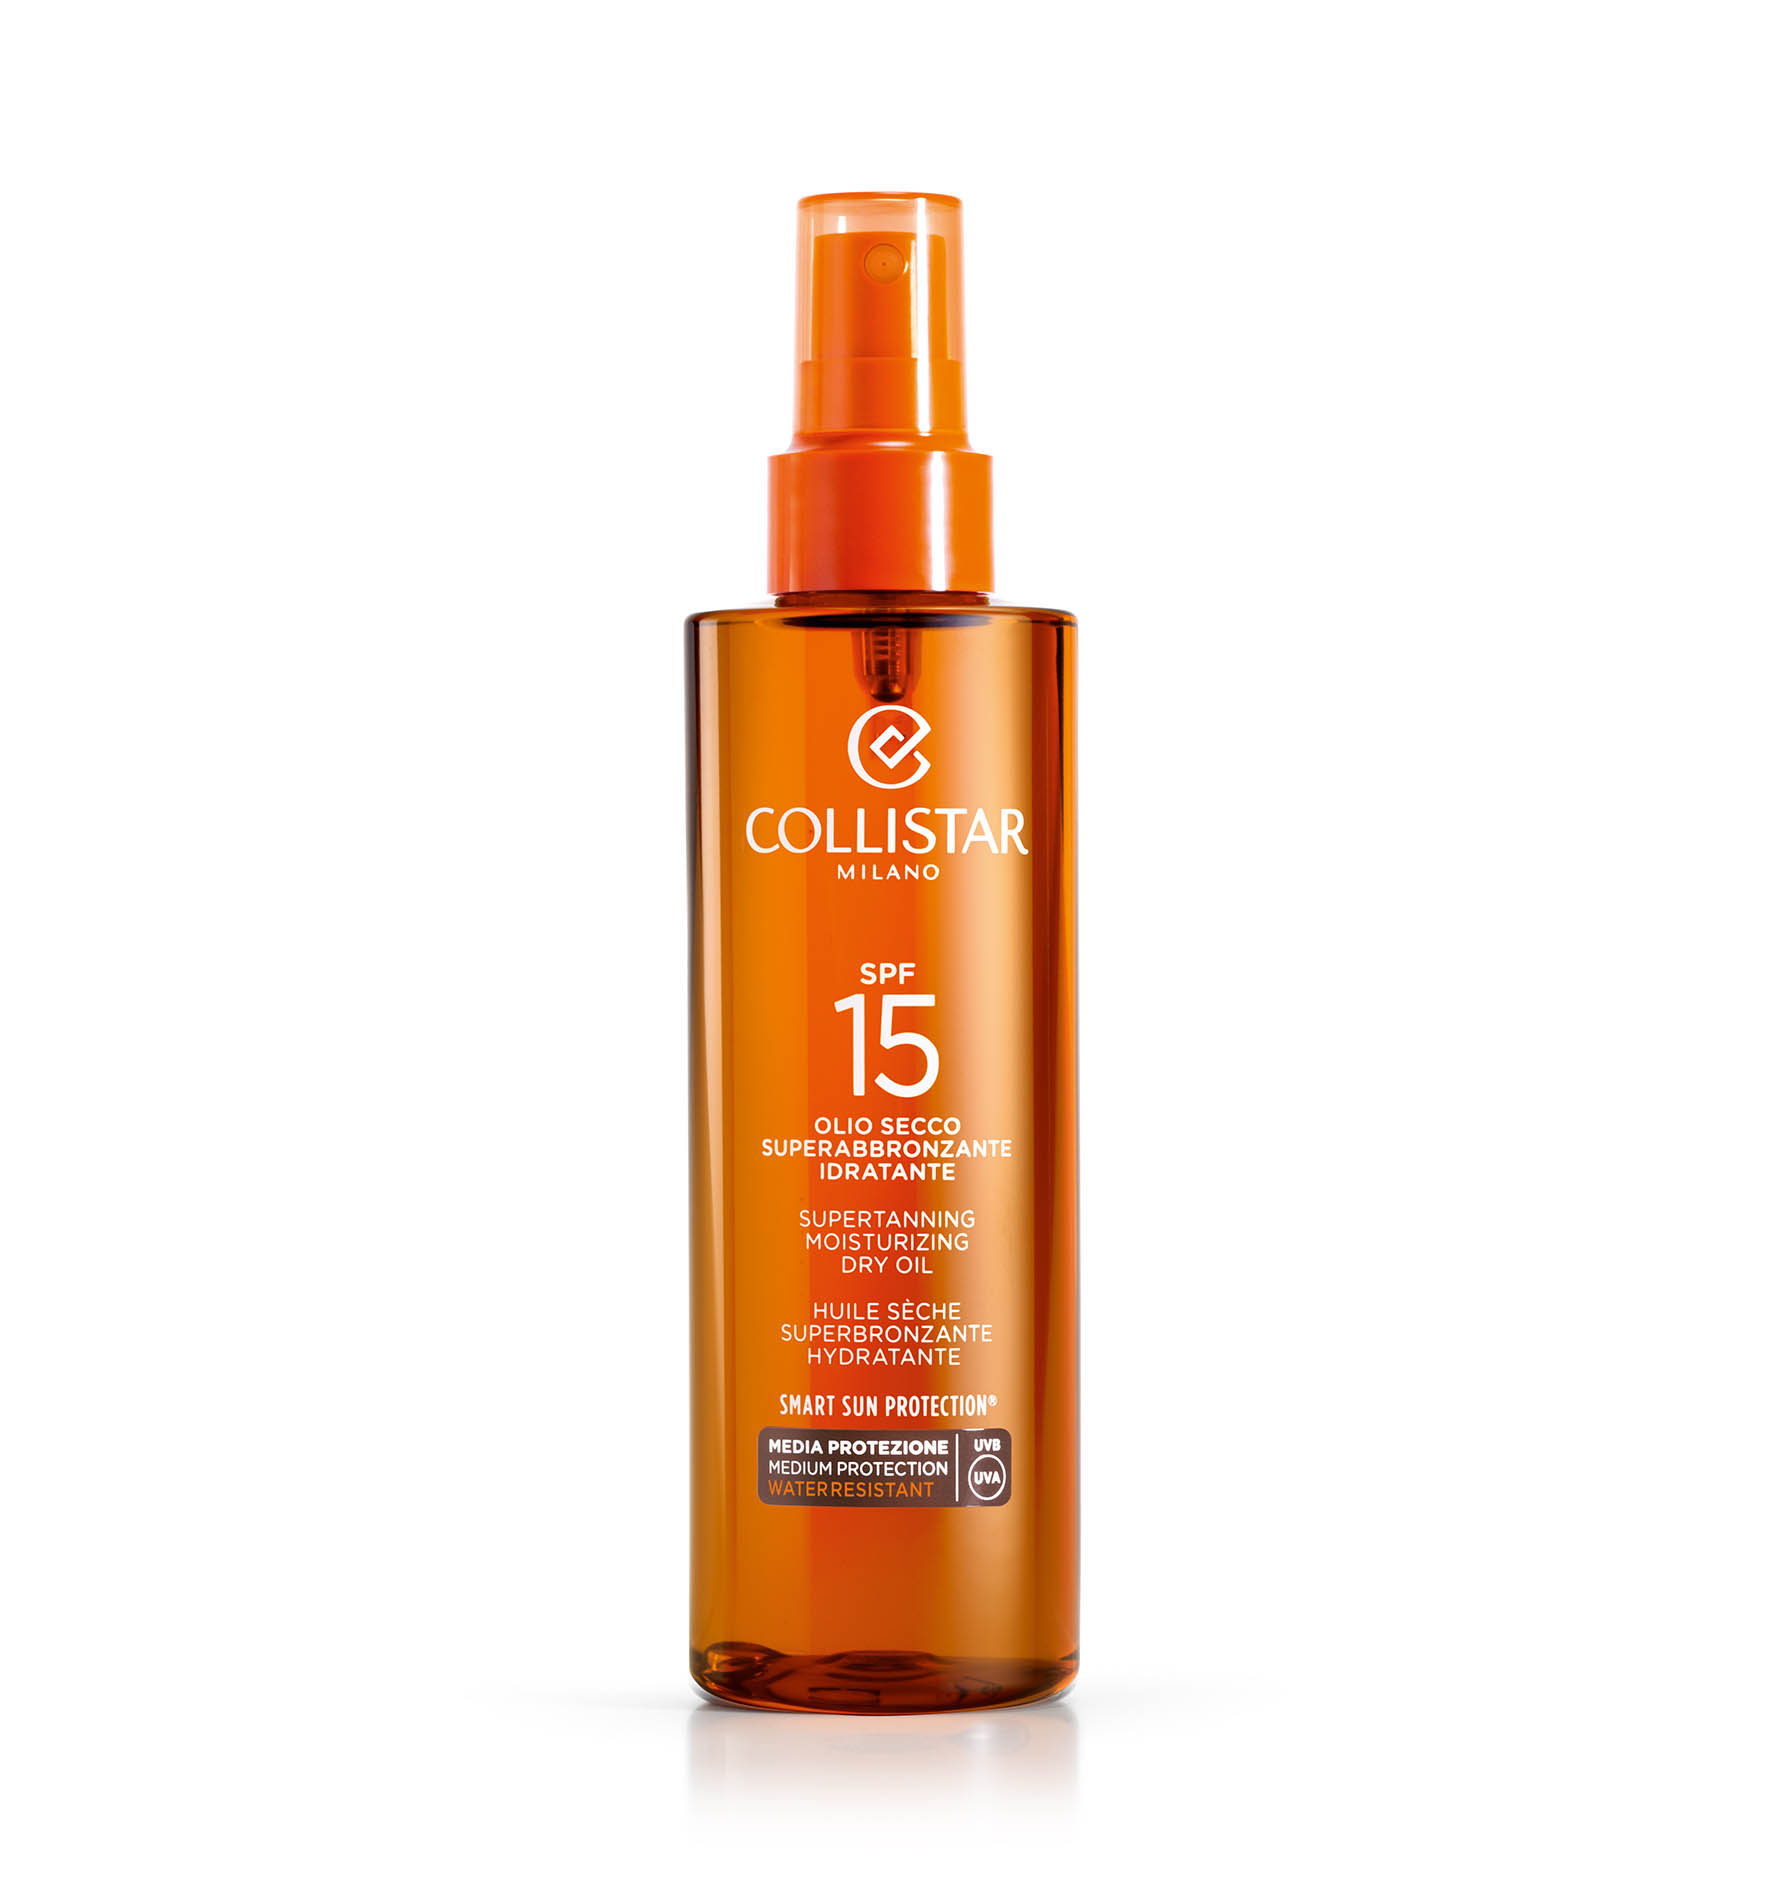 SUPERTANNING DRY OIL SPF 15 - Moderate Protection SPF 15-20 | Collistar - Shop Online Ufficiale